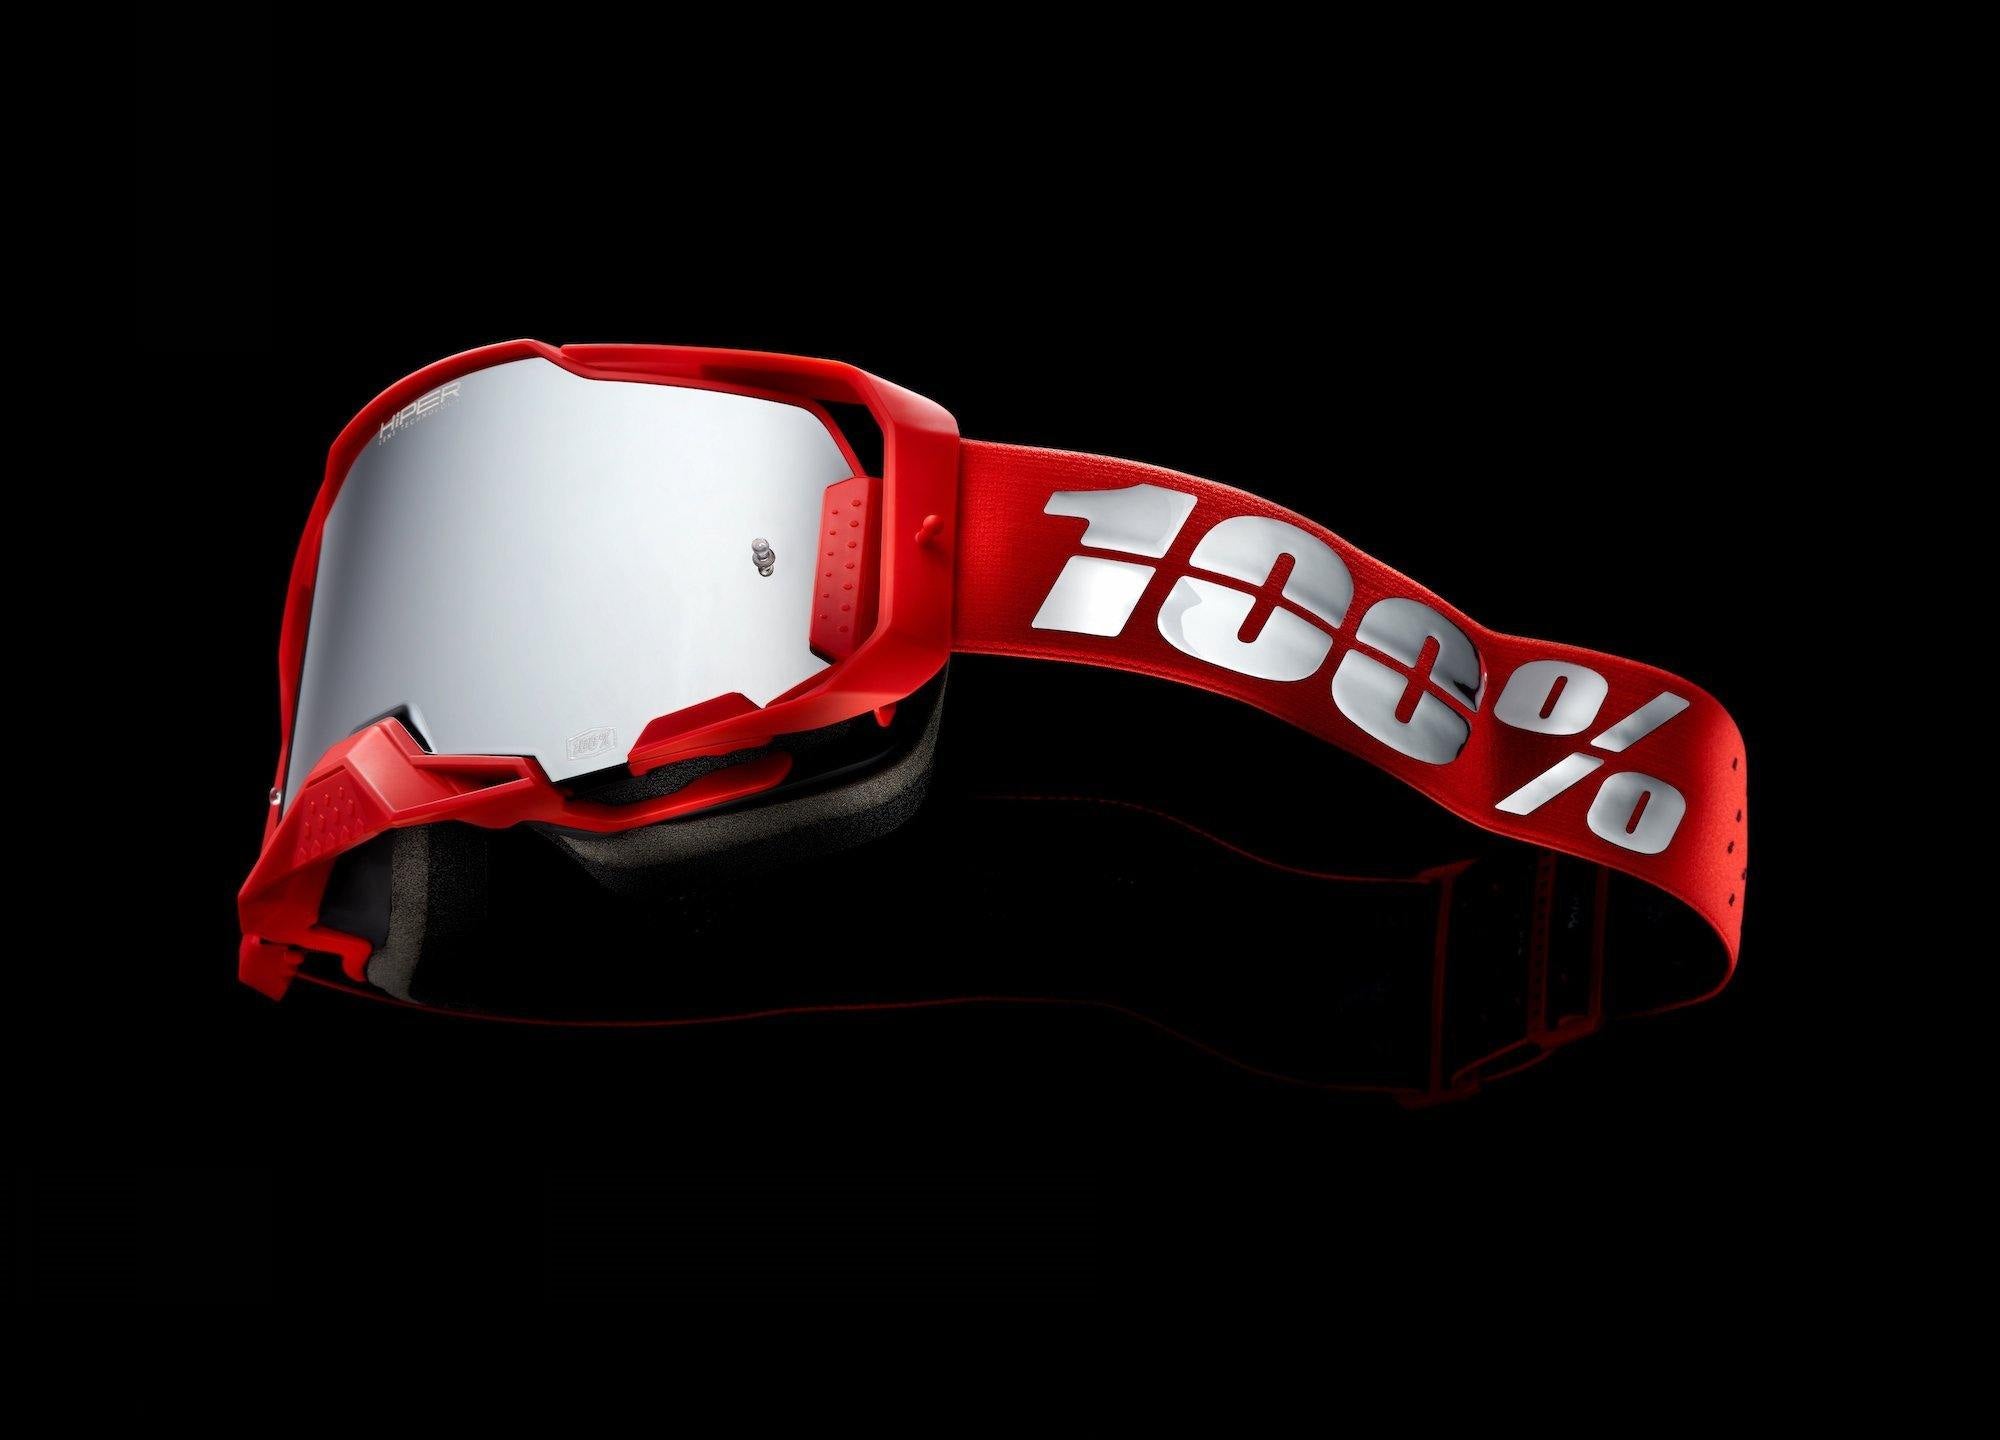 Introducing the Spring20 Goggle Collection - 100% Europe